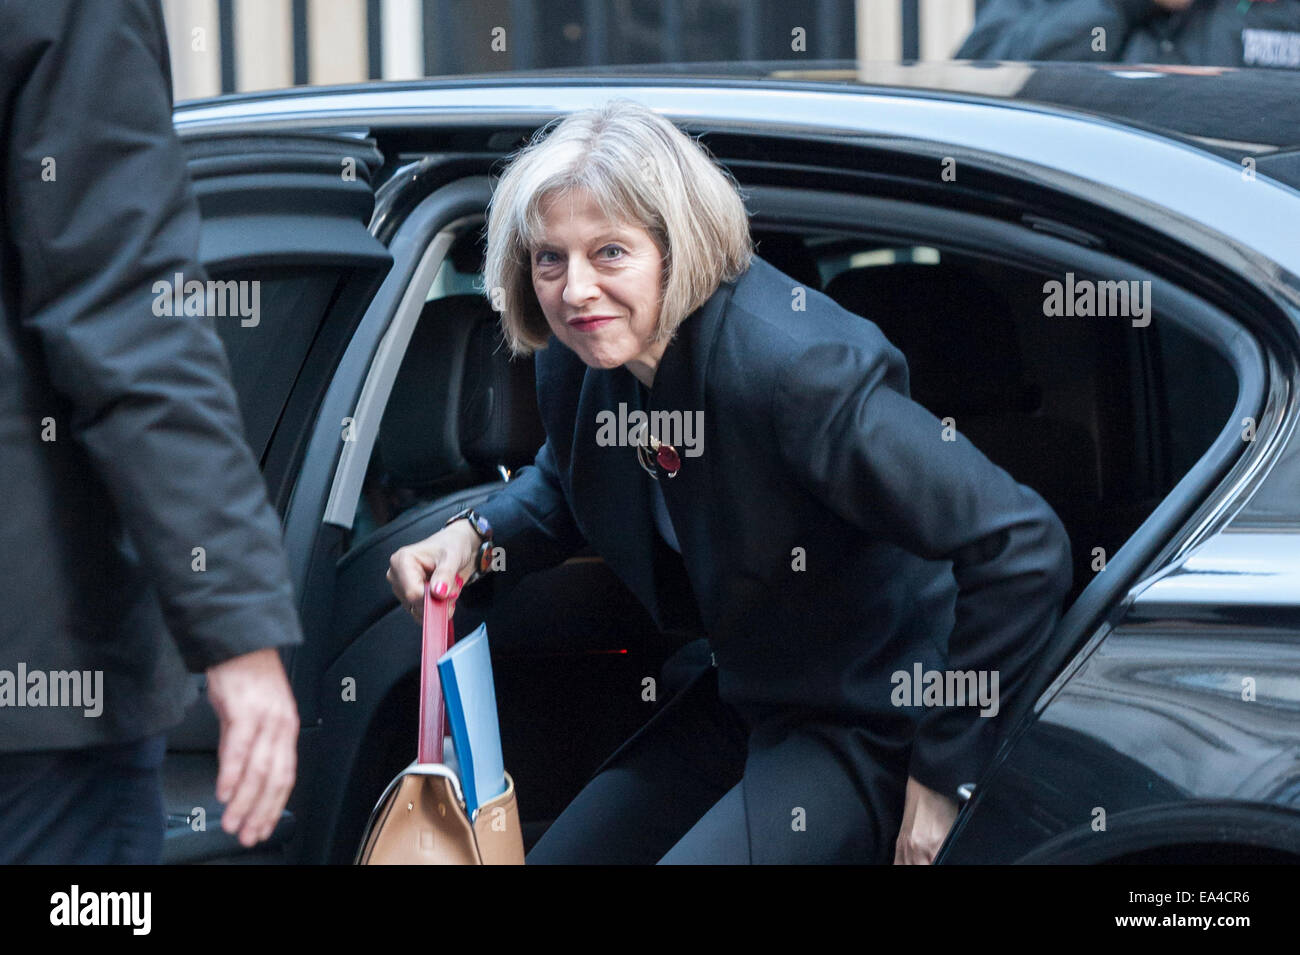 Downing Street, London, UK. 4th November 2014. Government ministers attend Downing Street for their weekly Cabinet Meeting. Pictured: Theresa May © Lee Thomas/Alamy Live News Stock Photo